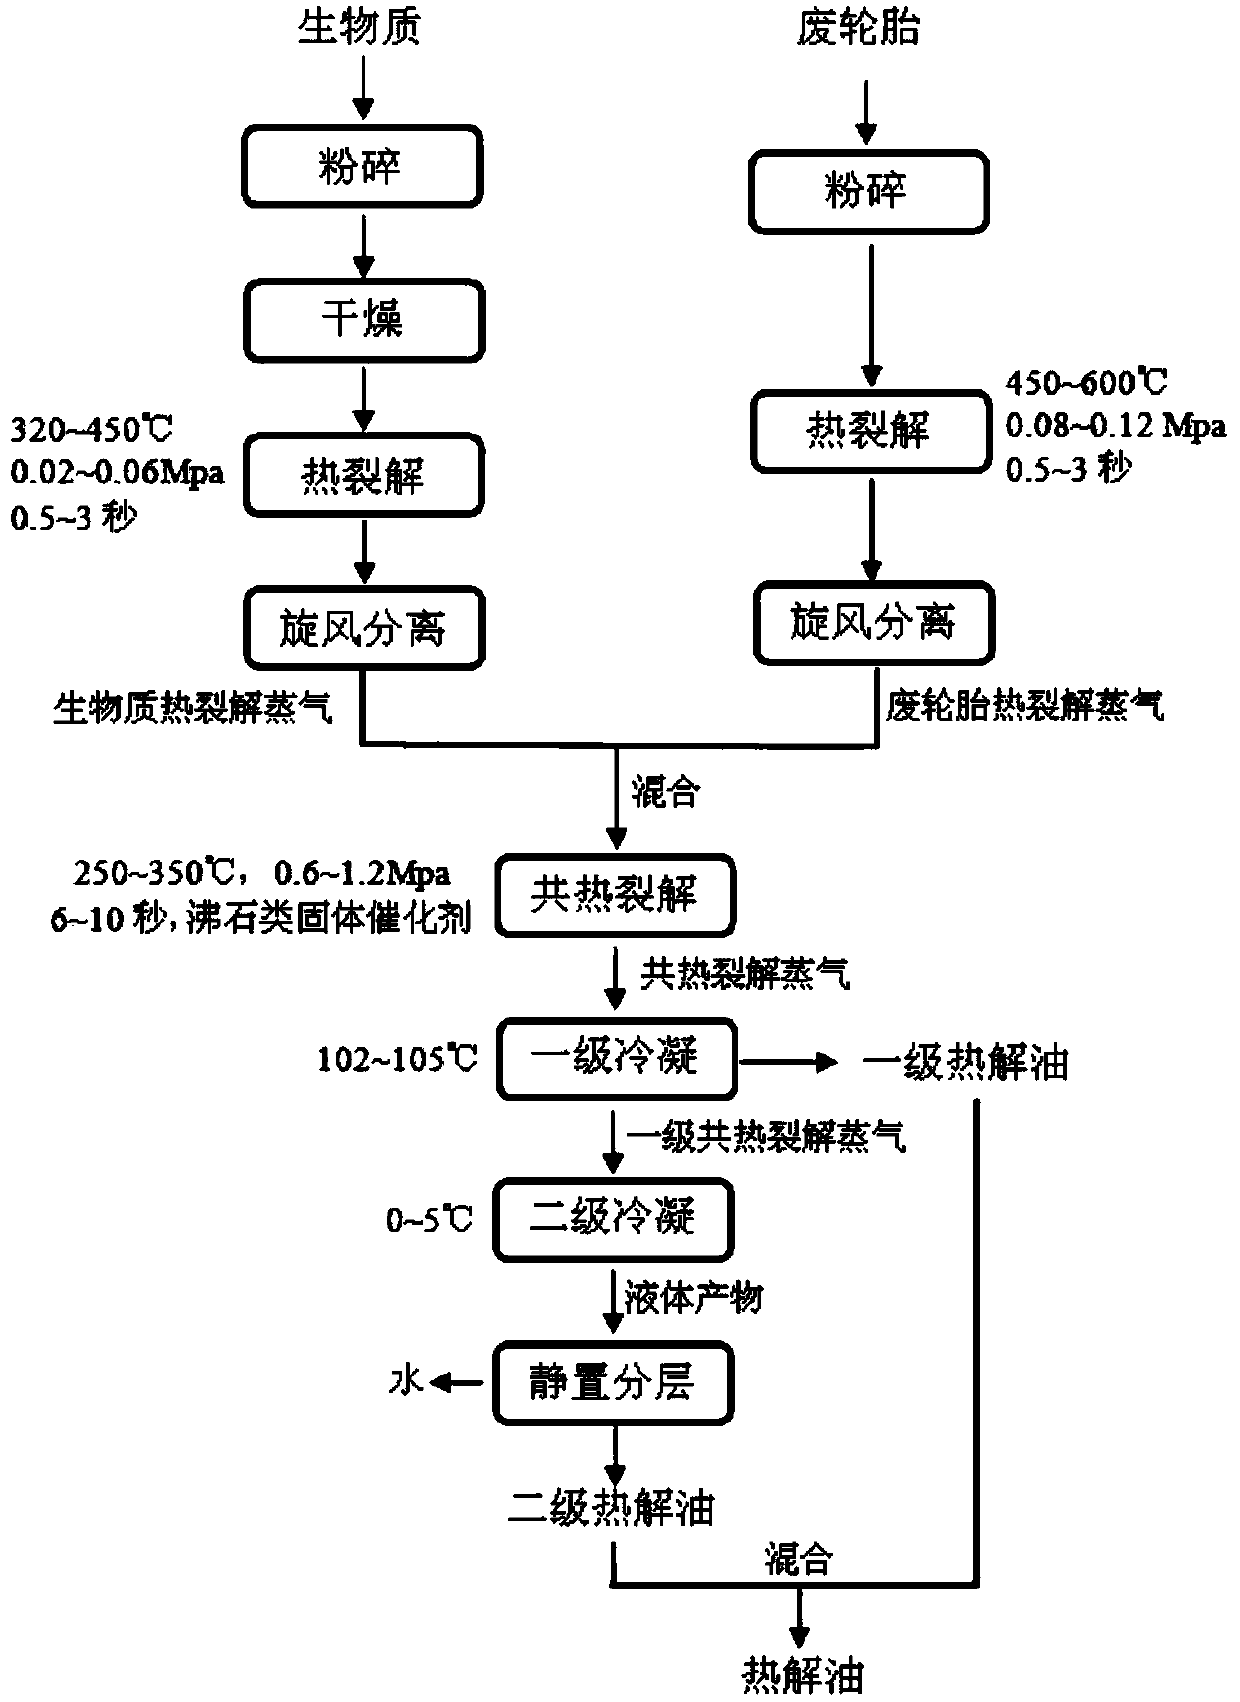 Method for preparing pyrolytic oil by co-heated pyrolysis and liquefaction of biomass and waste tire